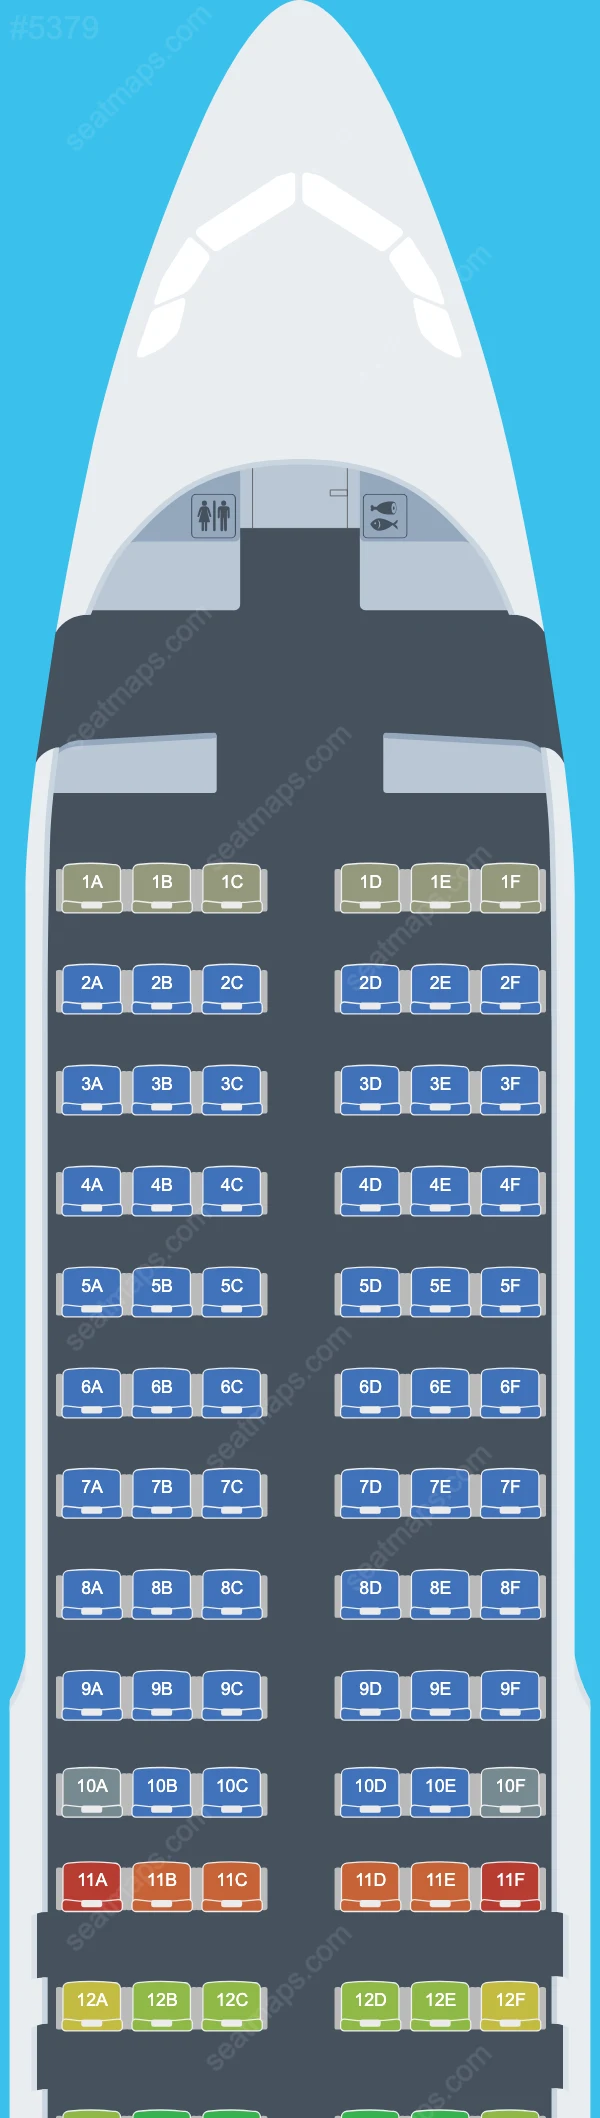 LATAM Airlines Airbus A320 Seat Maps A320-200 V.1